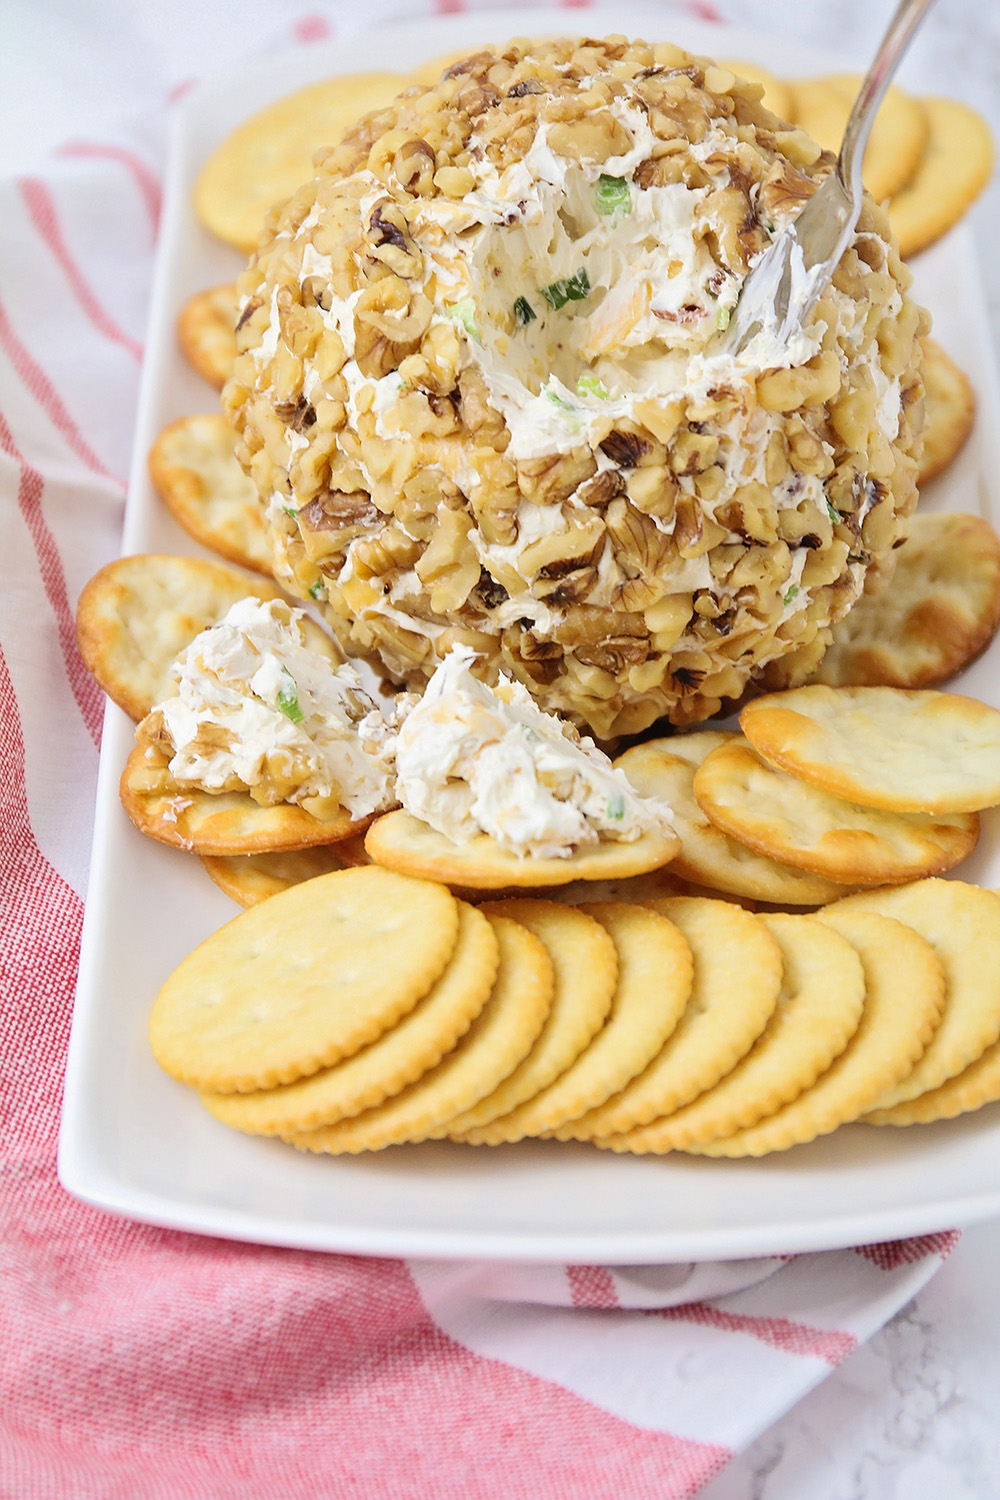 This savory and flavorful bacon cheddar cheeseball is so easy to make, and so delicious. It's the perfect party appetizer!